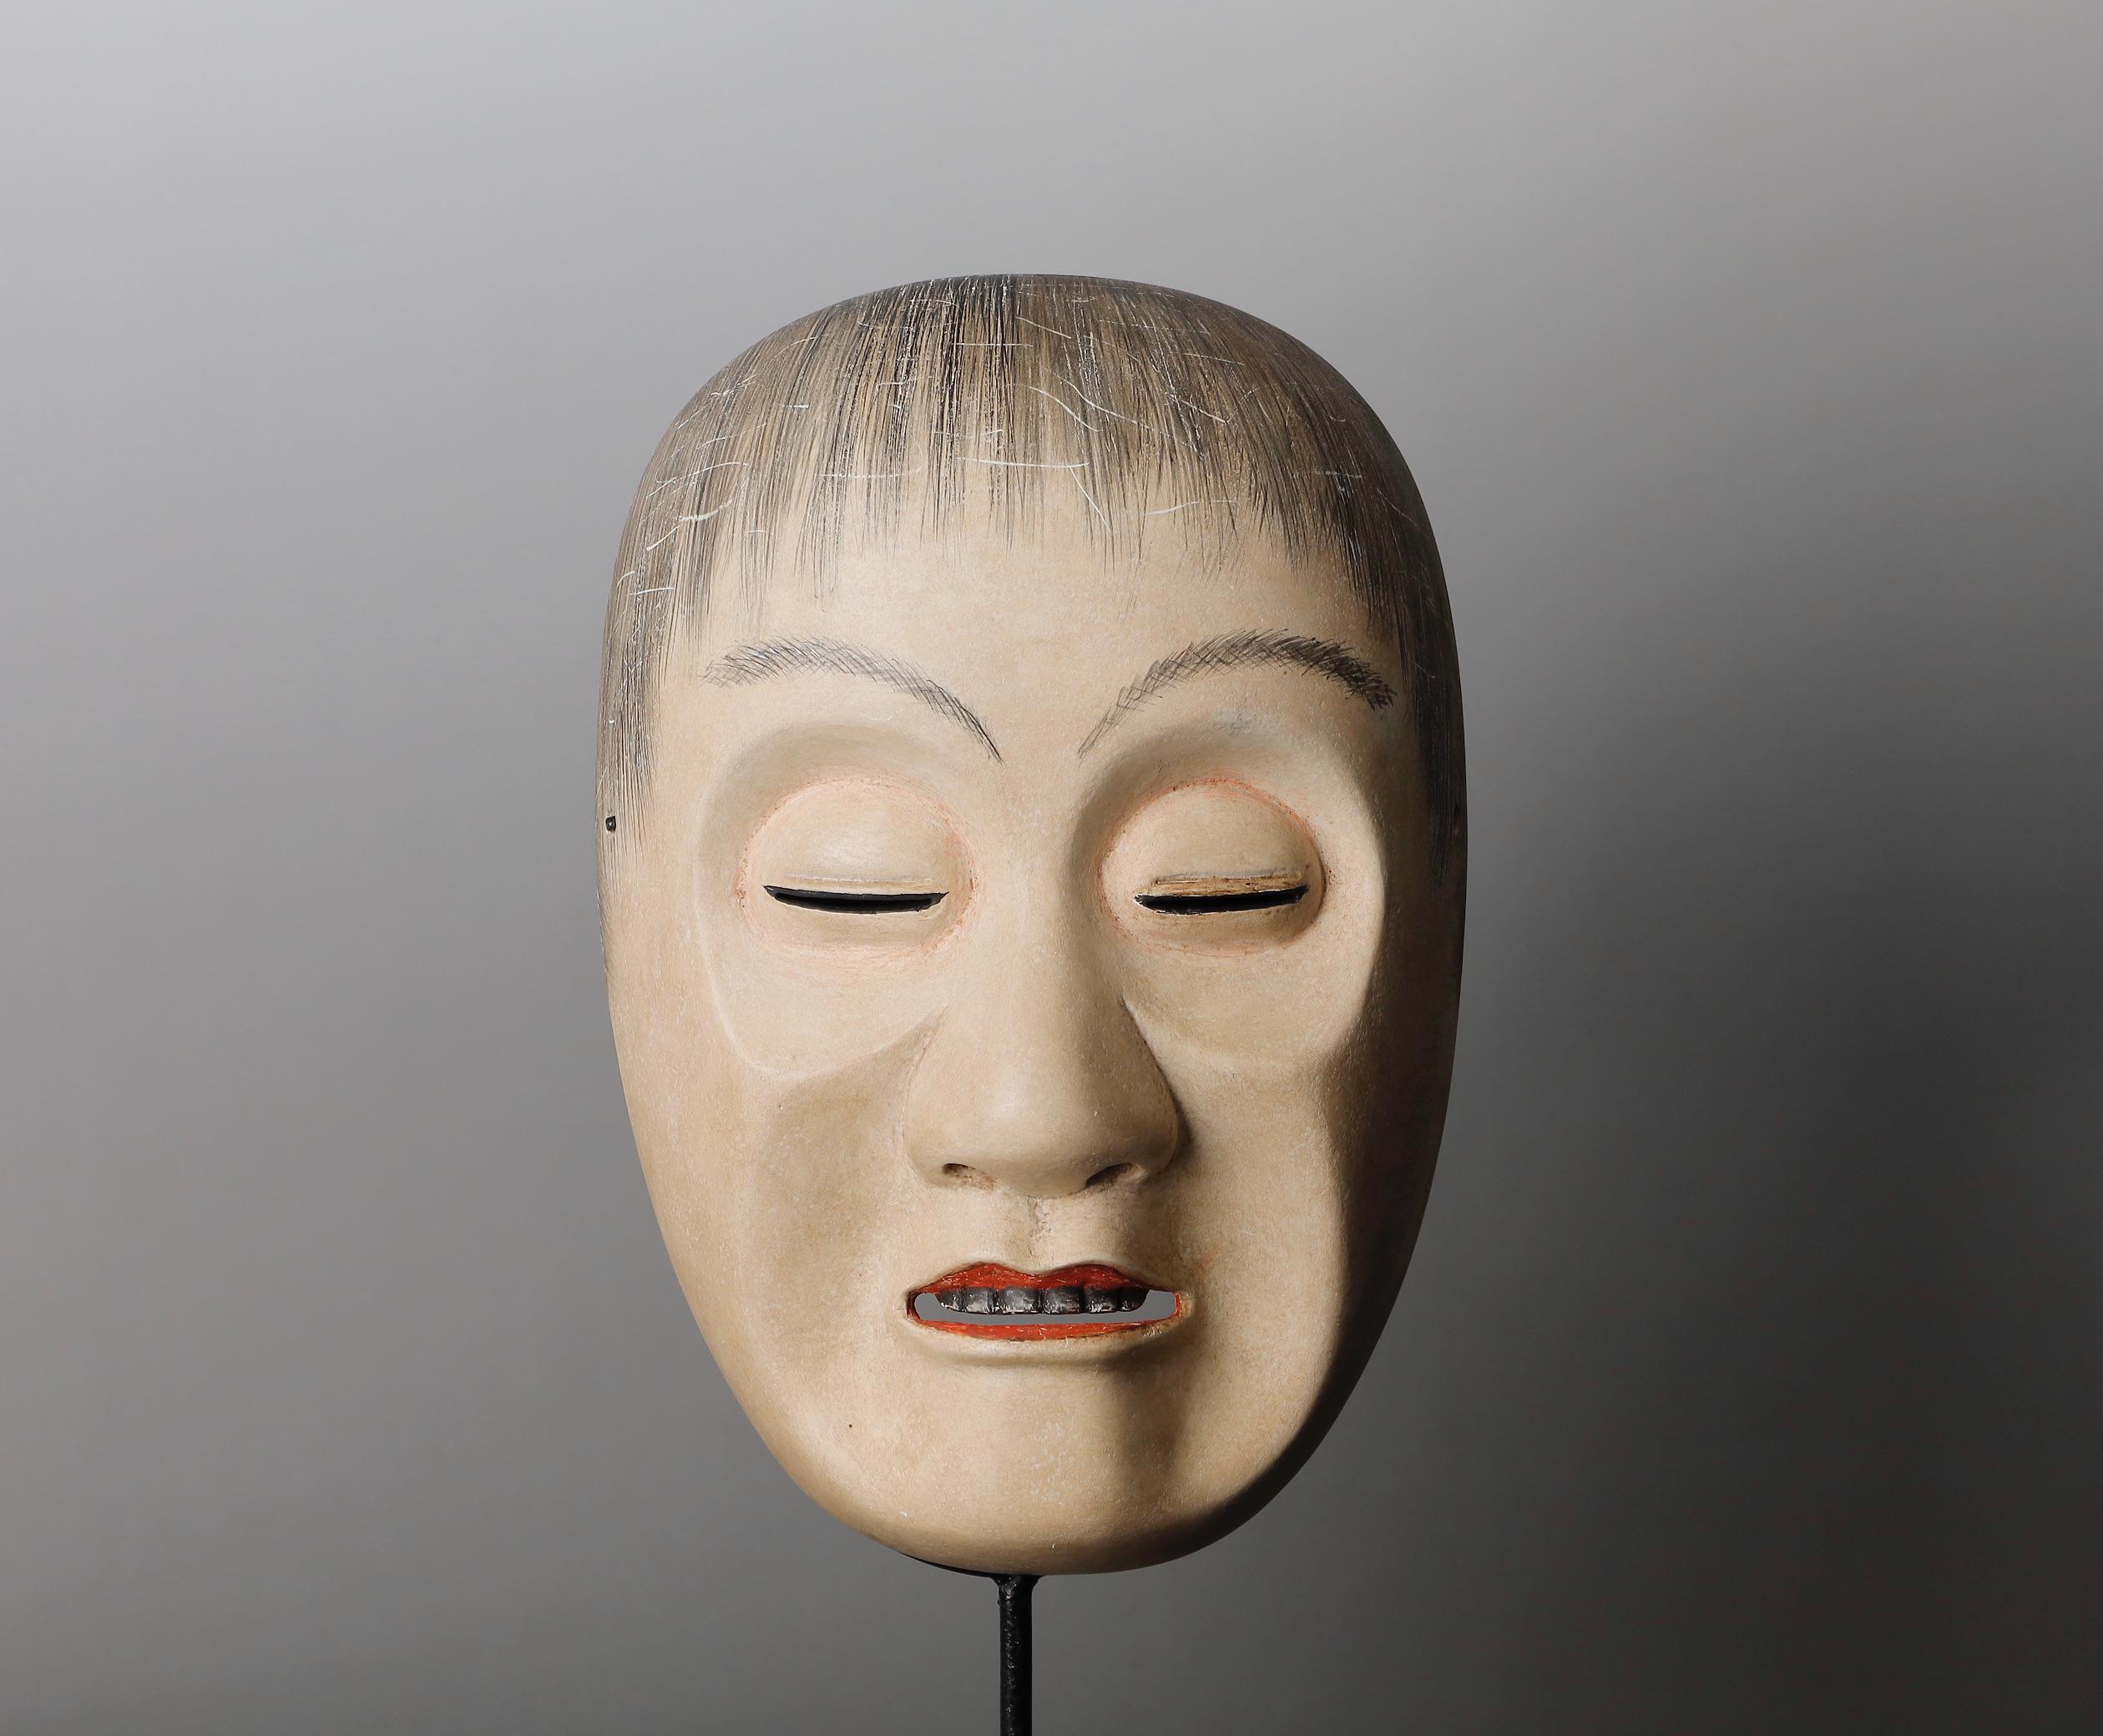 Japanese signed Noh Mask depicting Yoroboshi (Blind Monk) character
Yoroboshi captures the complex emotions of intense grief and spiritual deliverance. Behind the painful derangement that is the surface expression of the mask lies an elegance of